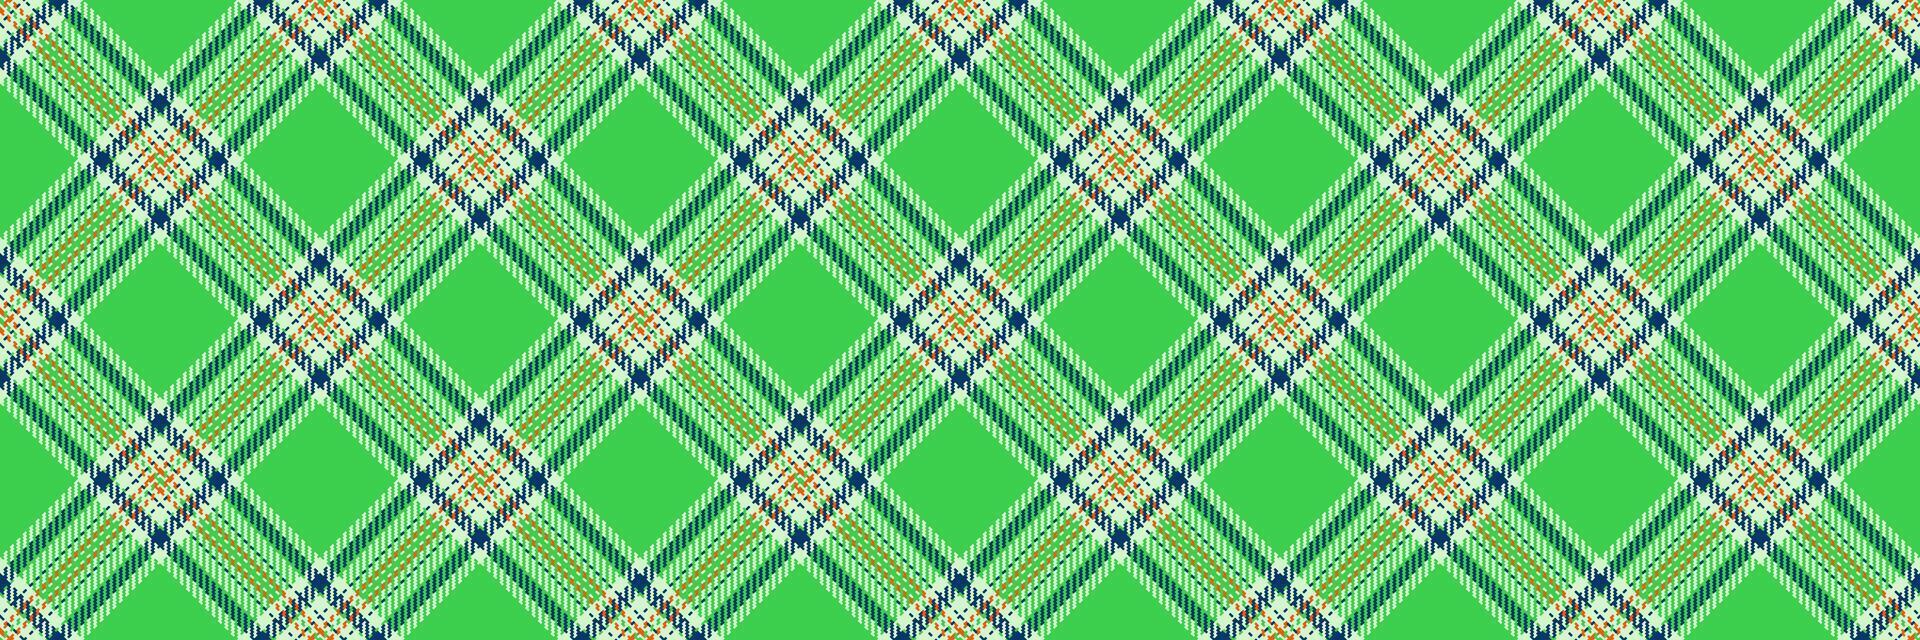 List tartan pattern seamless, art plaid vector texture. Stripe check fabric textile background in green and light colors.